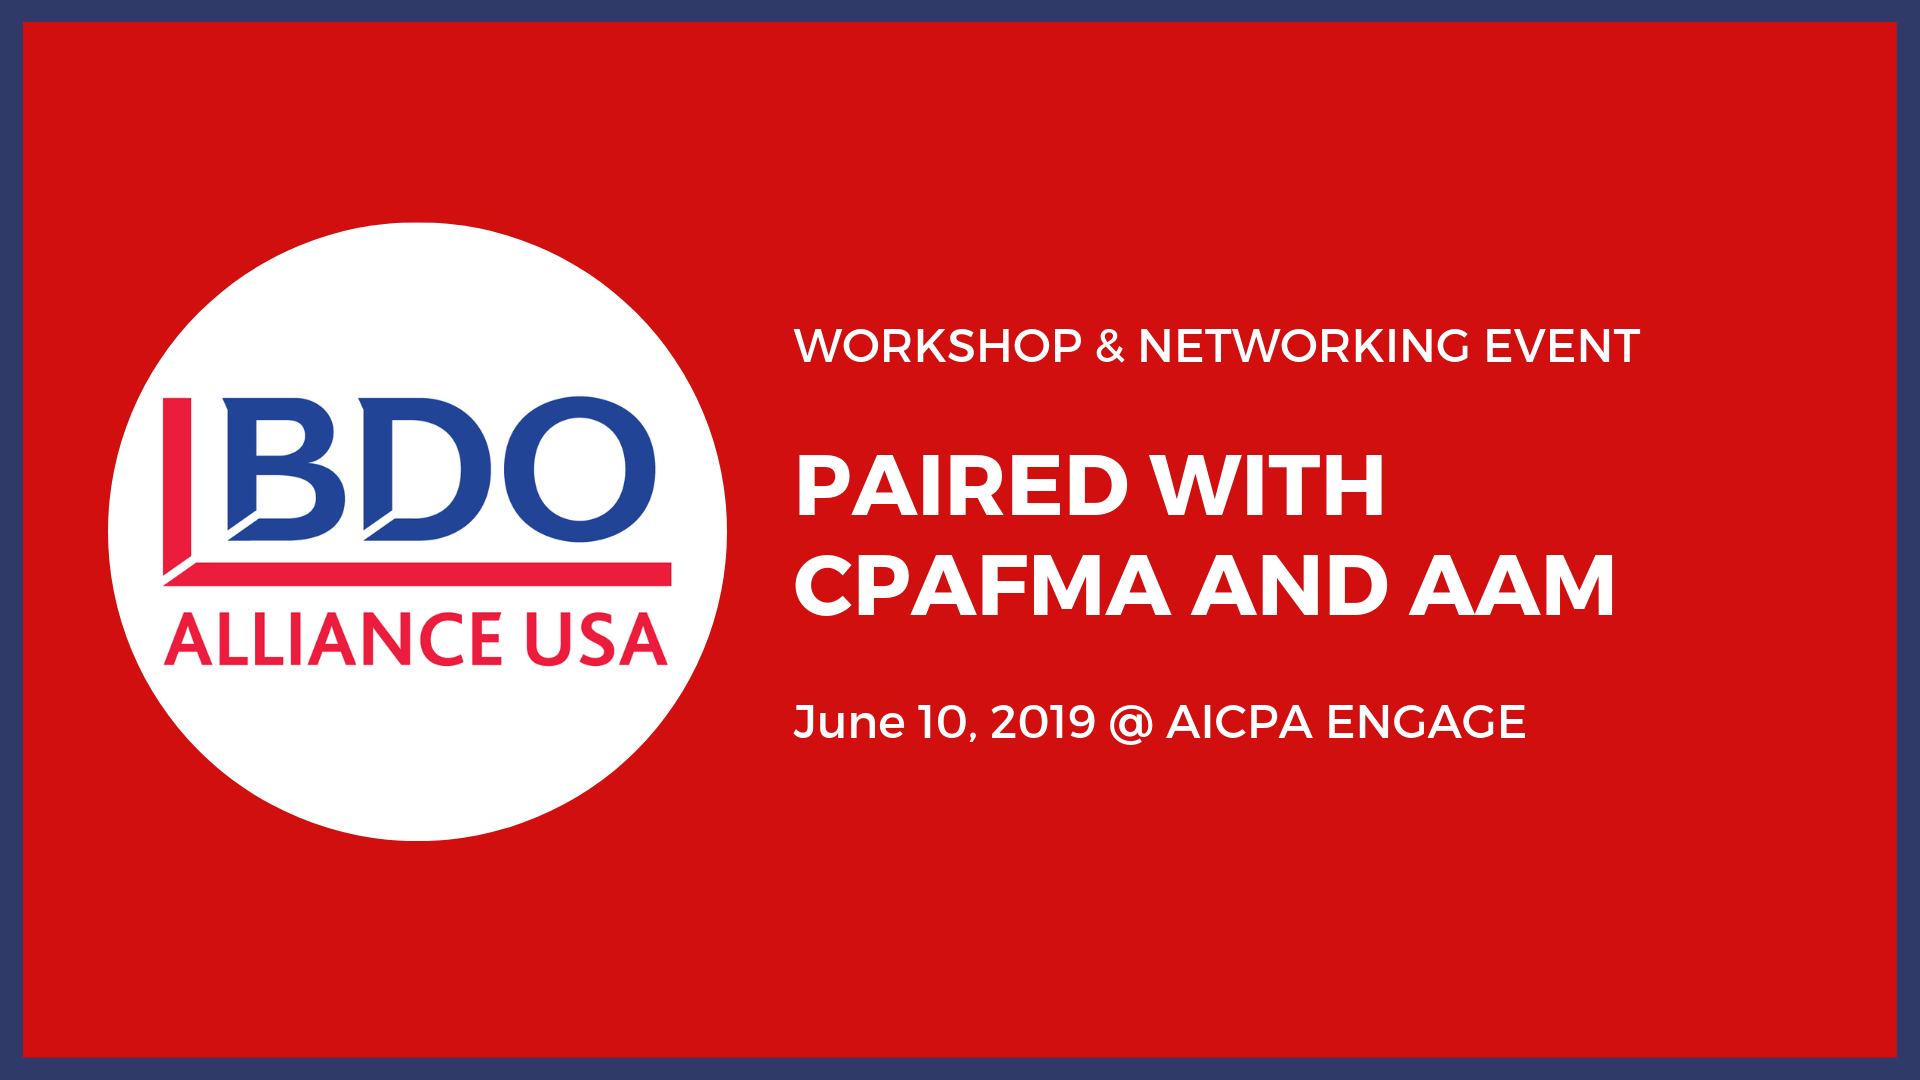 BDO Alliance and Networking Event Held with CPAFMA National